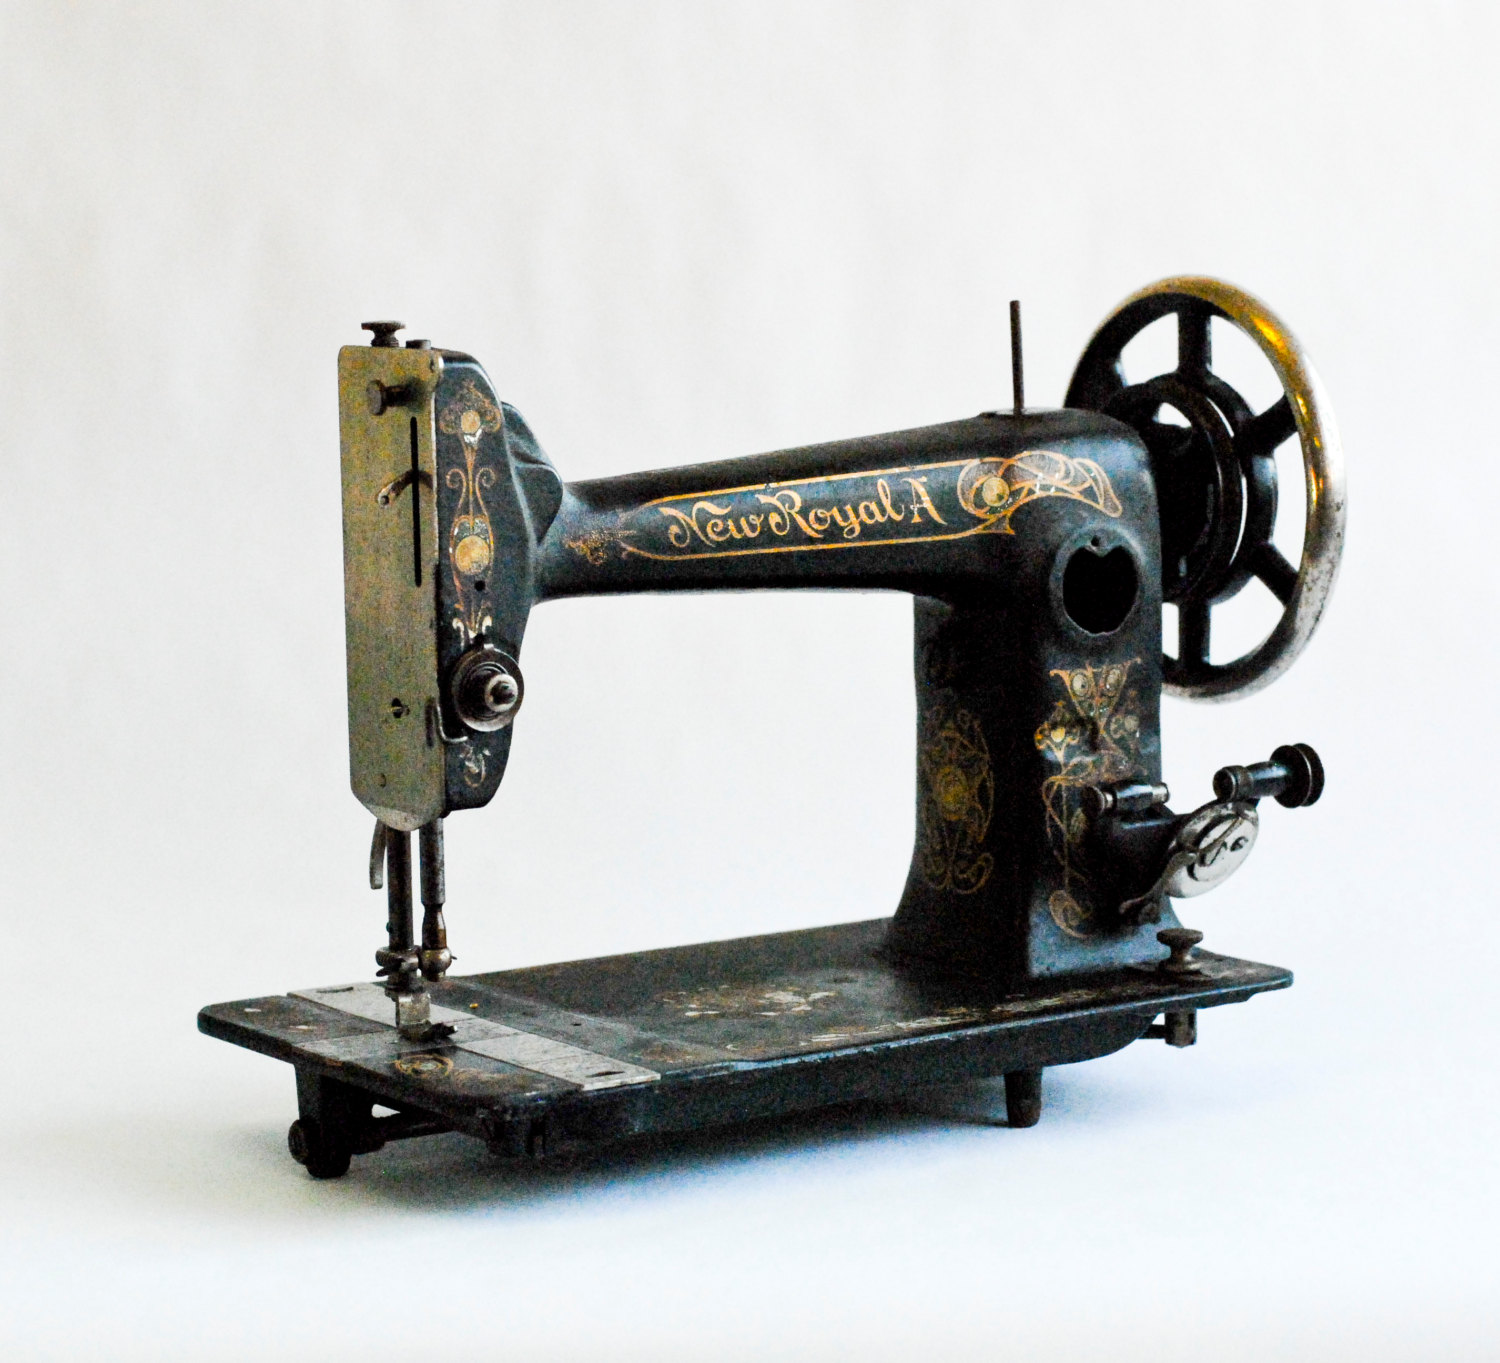 antique and vintage sewing machines